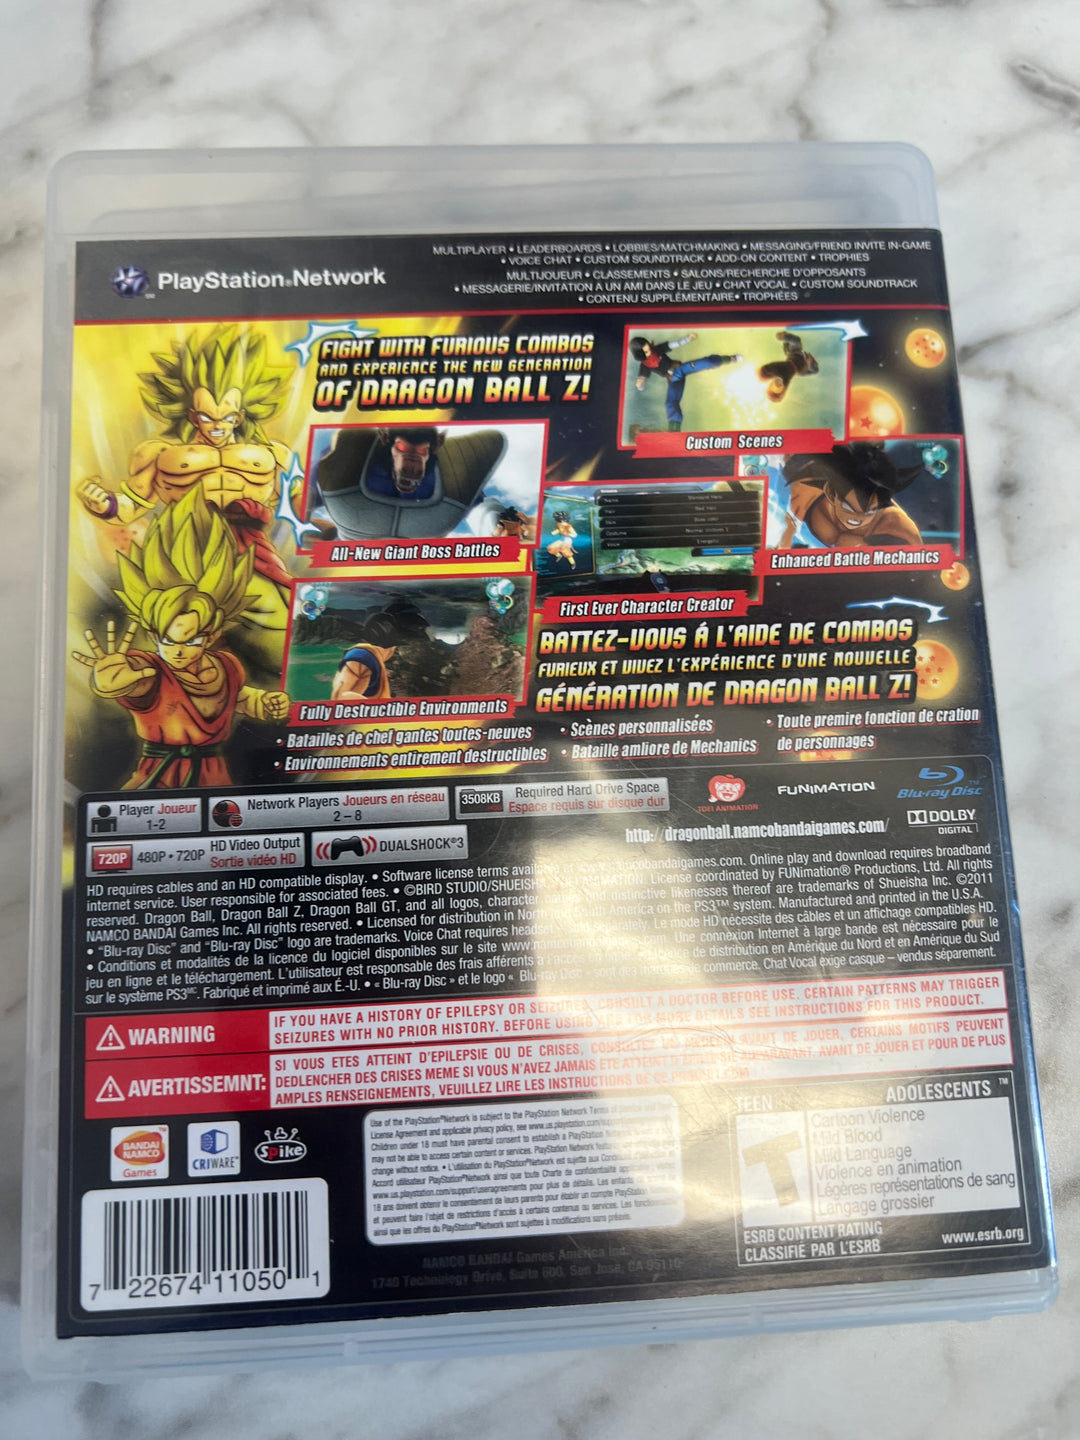 Dragonball Z Ultimate Tenkaichi for PS3 Playstation 3 Case and manual only